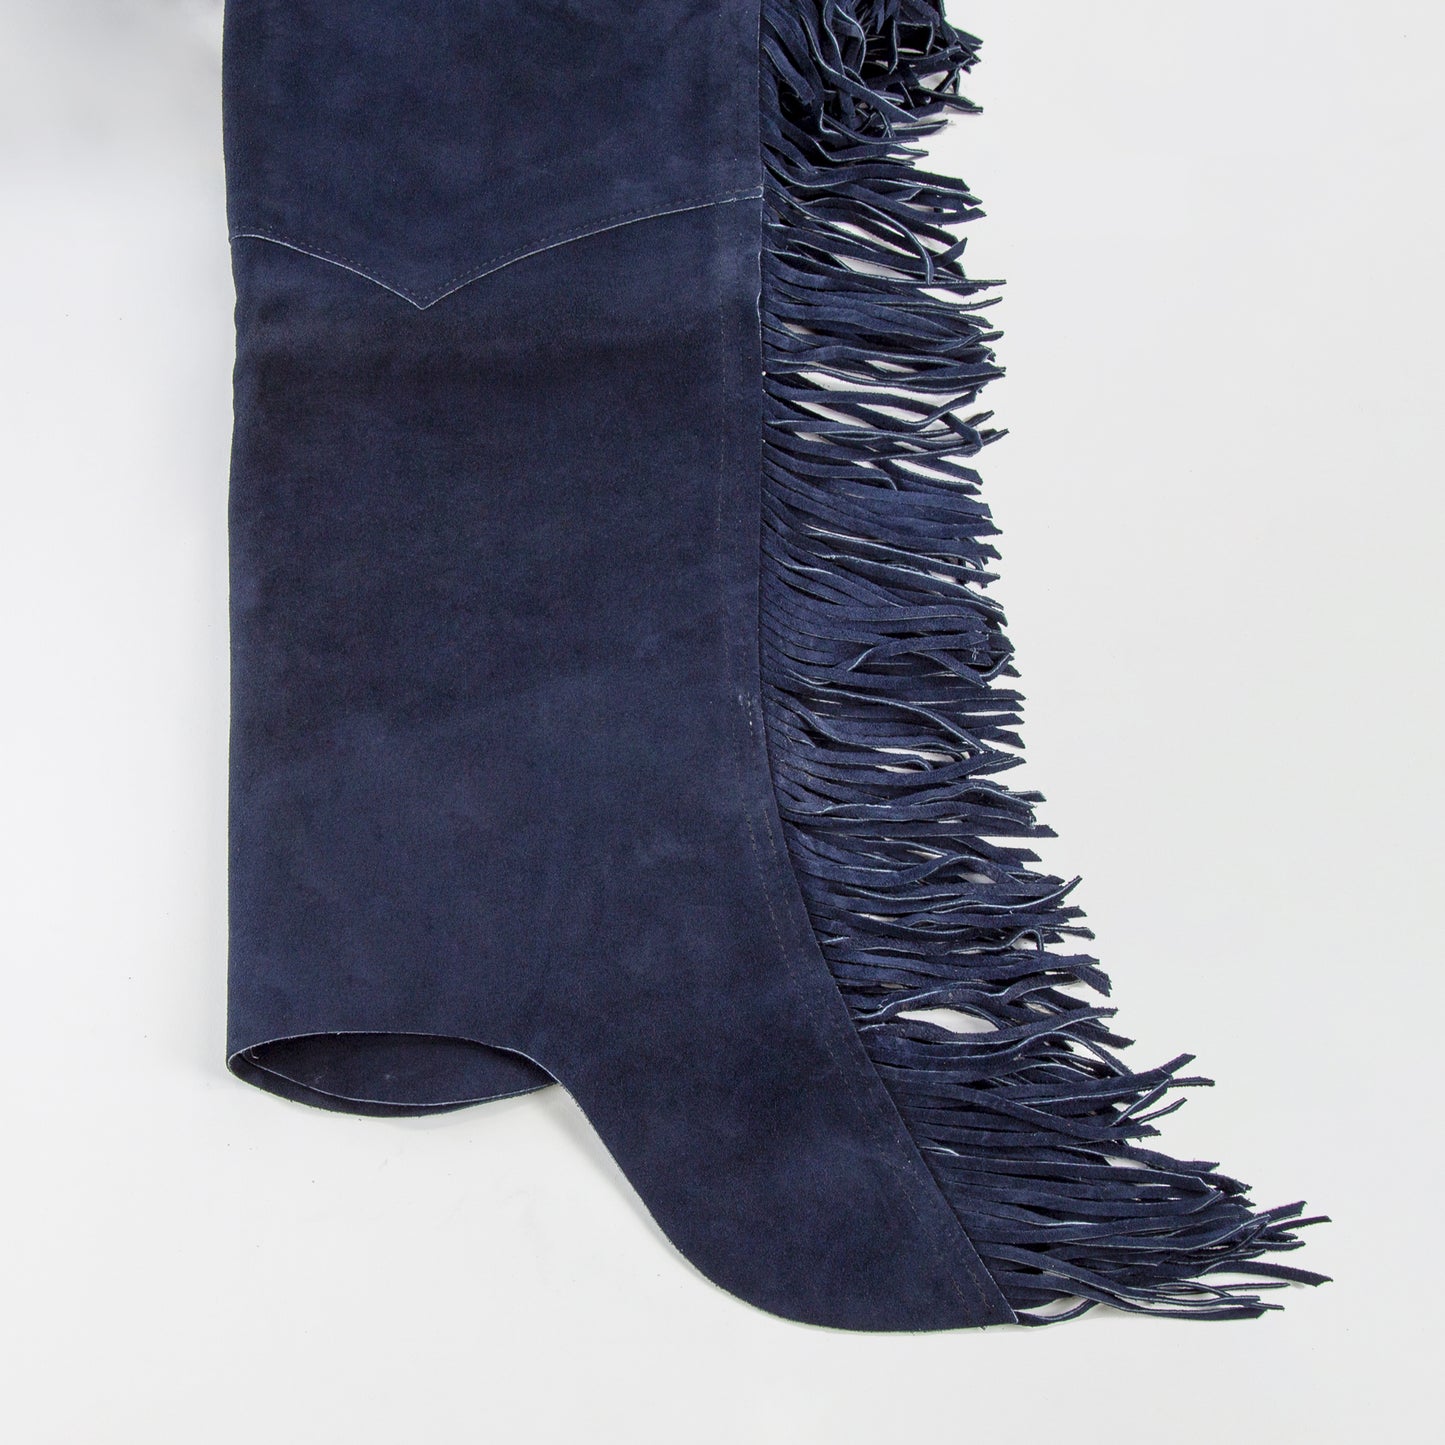 Western Equitation Chaps - Navy Suede - Fringe - Double Concho